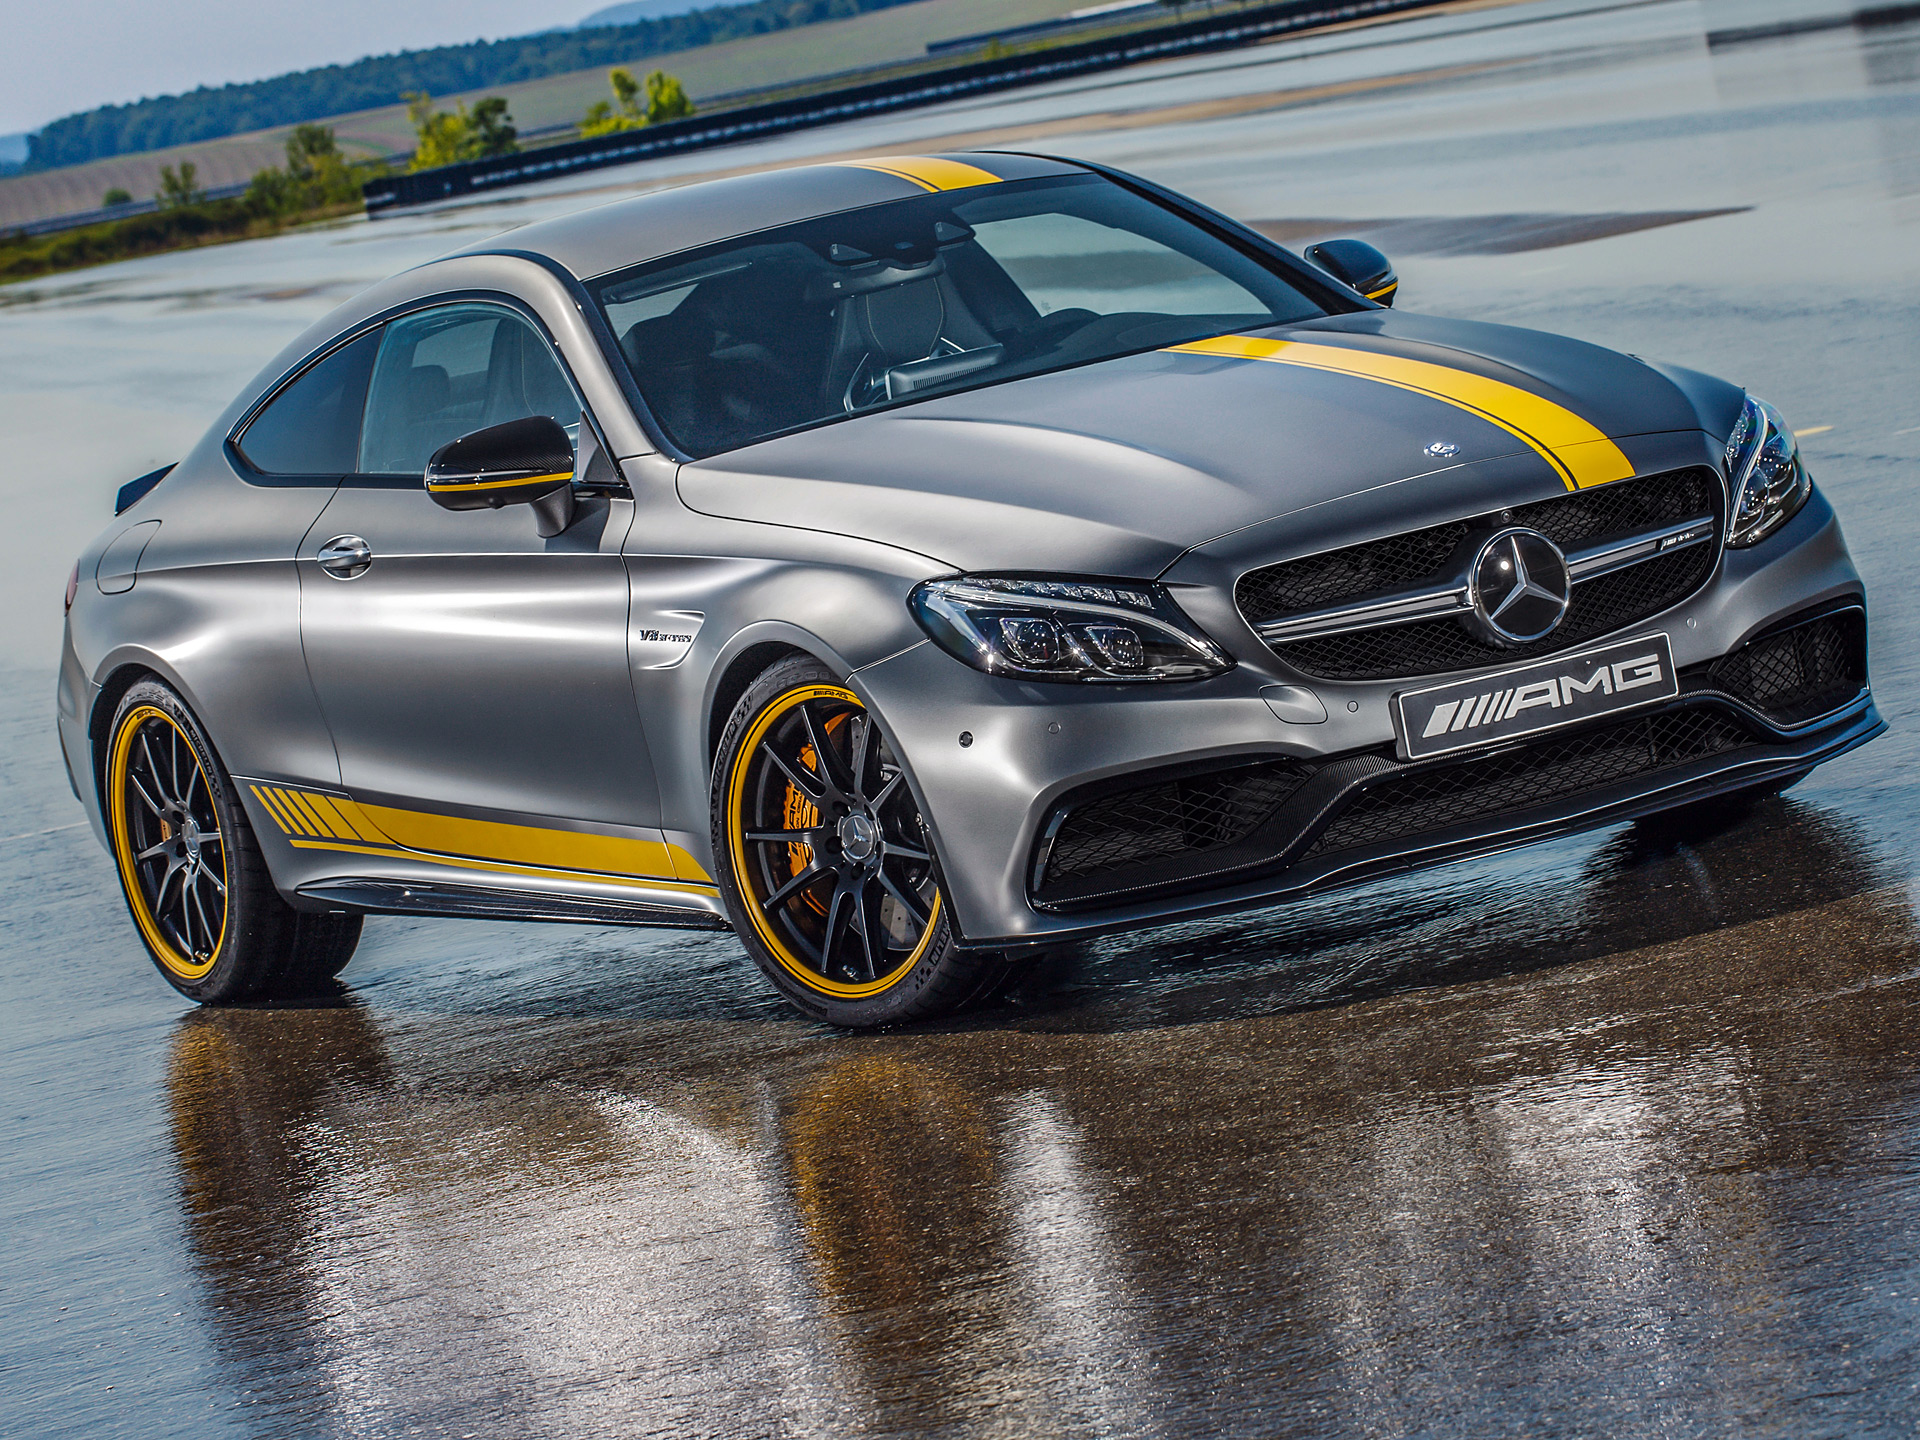  2017 Mercedes-Benz C63 AMG Coupe Edition 1 Wallpaper.